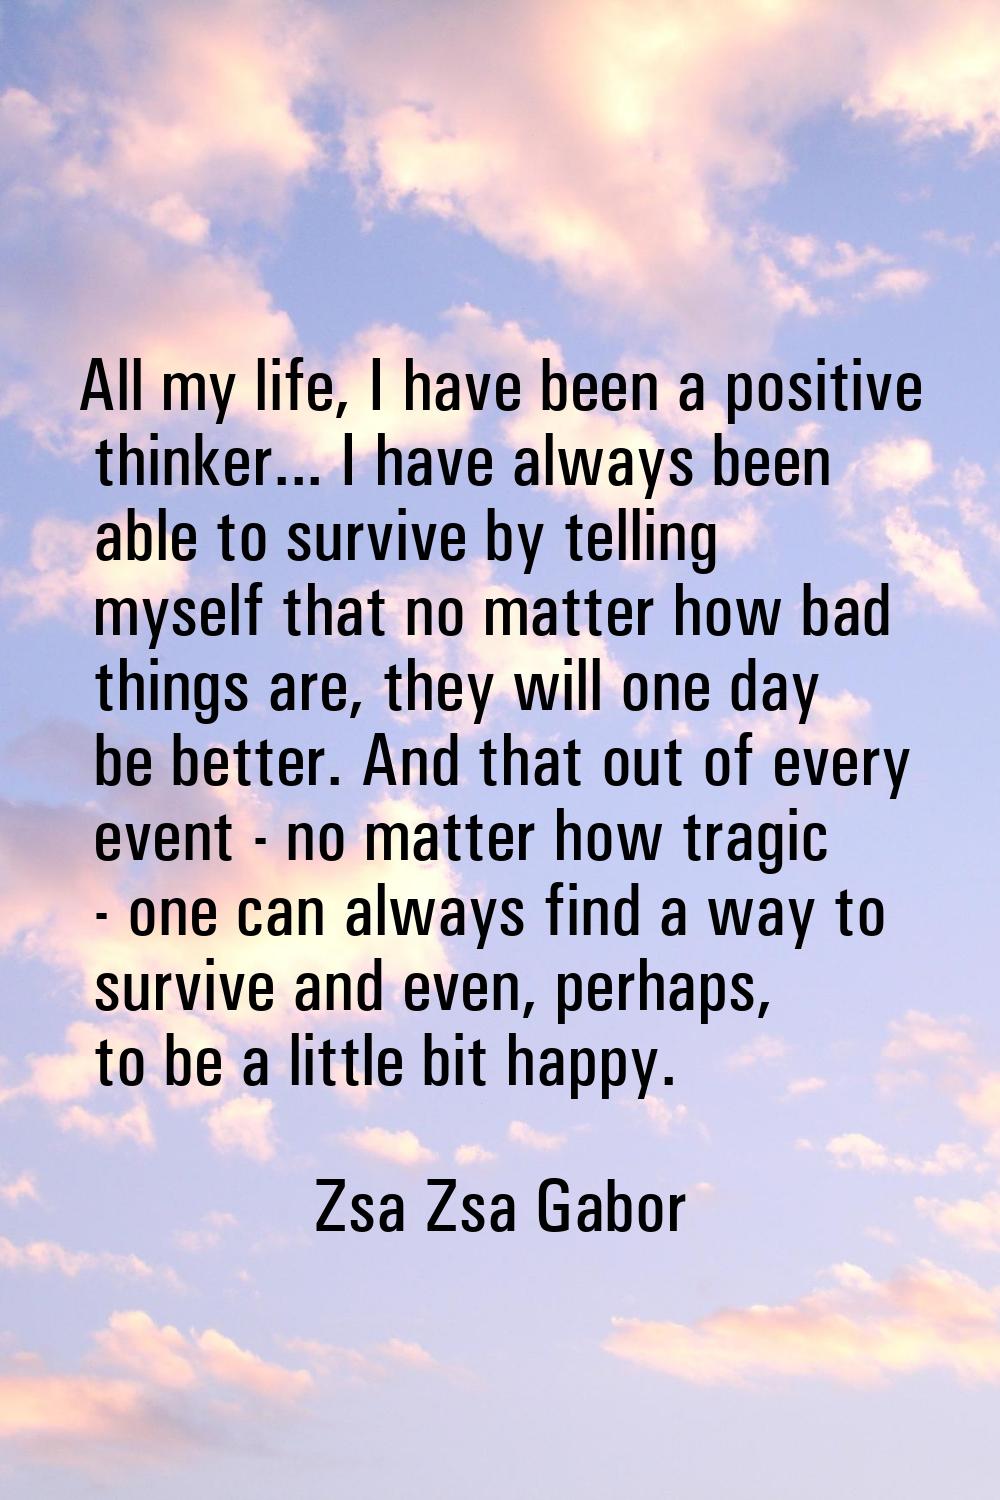 All my life, I have been a positive thinker... I have always been able to survive by telling myself